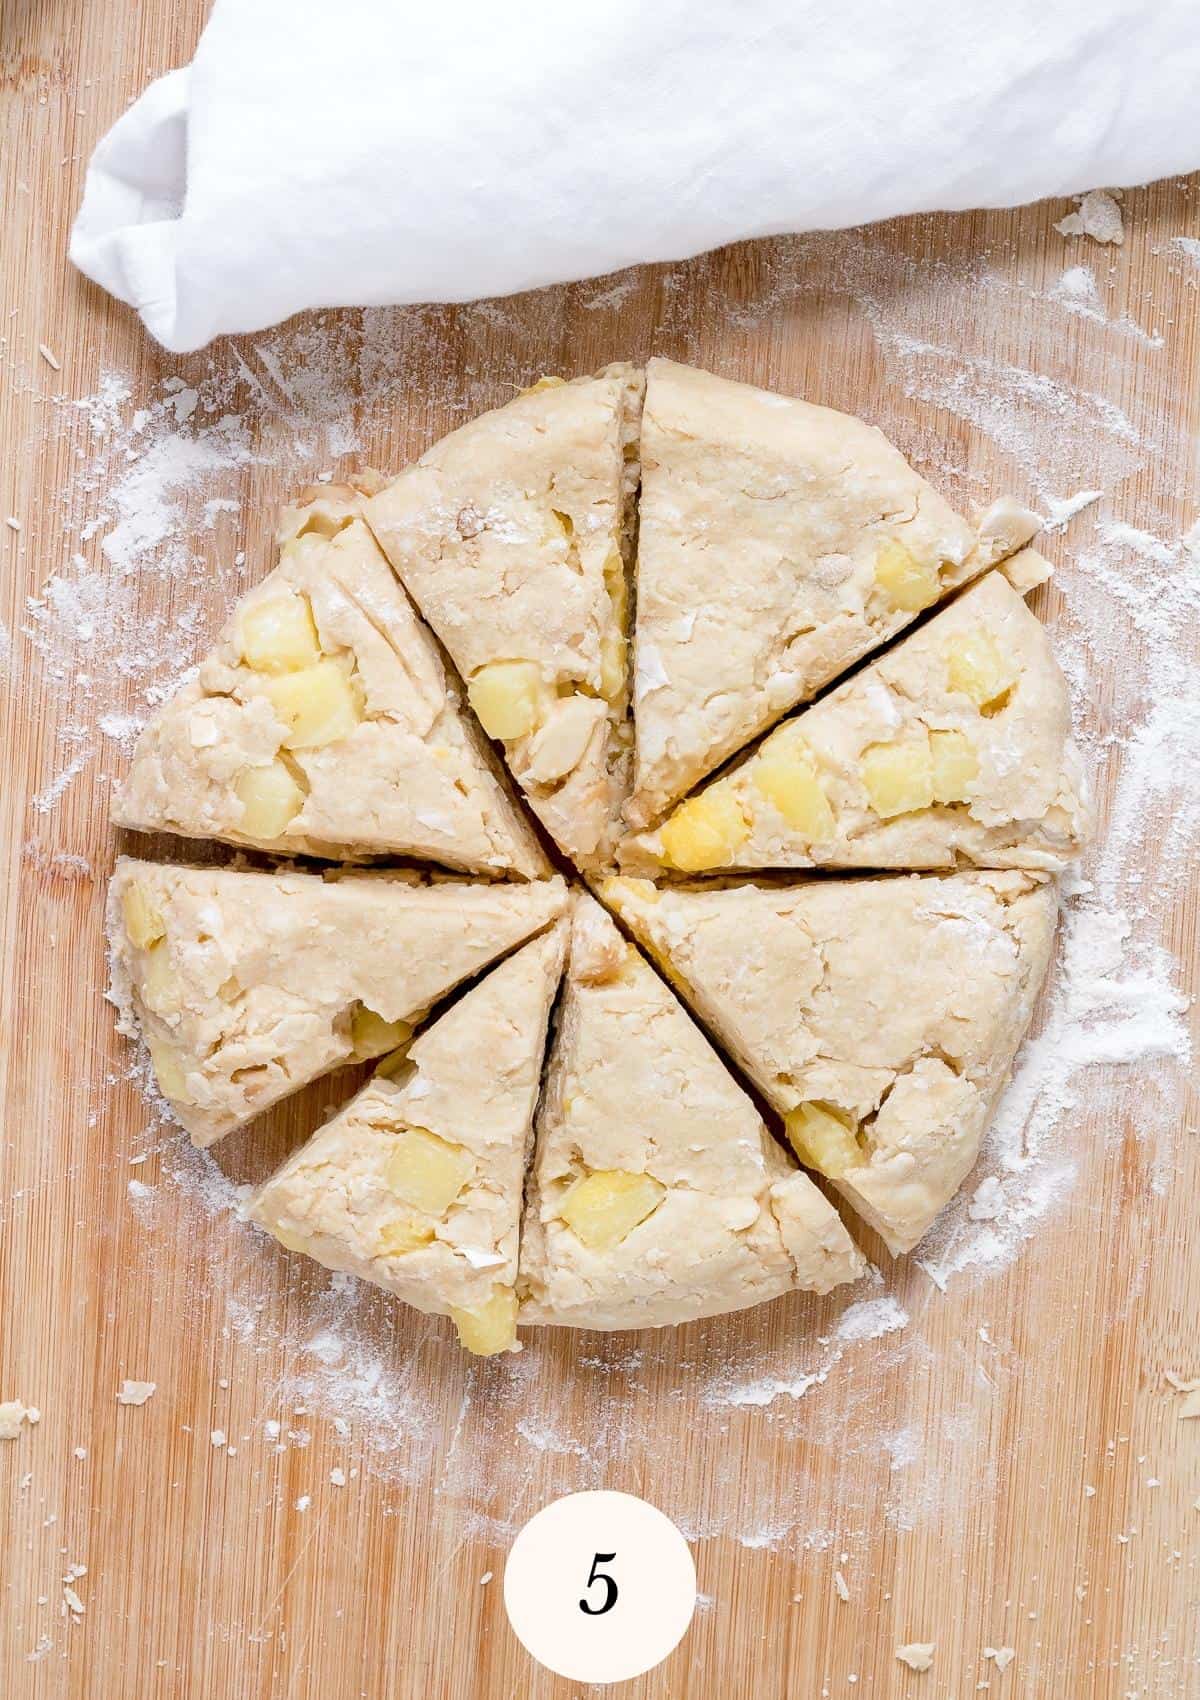 scone dough in circle and cut into wedges